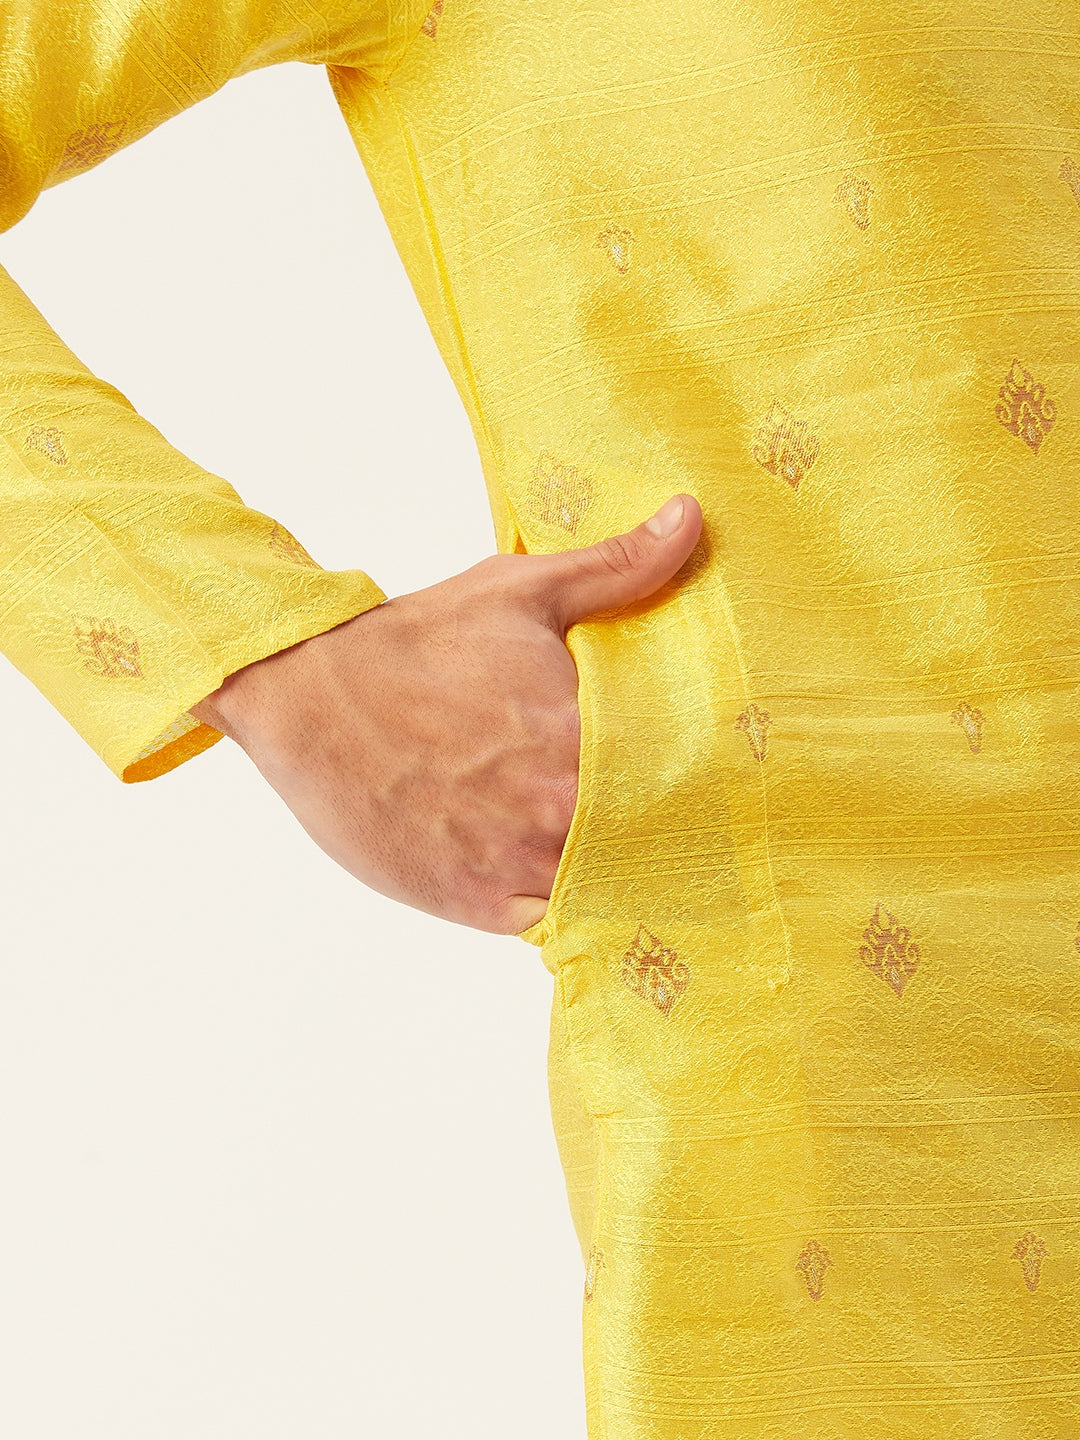 Jompers Men's Yellow Coller Embroidered Woven Design Kurta Only